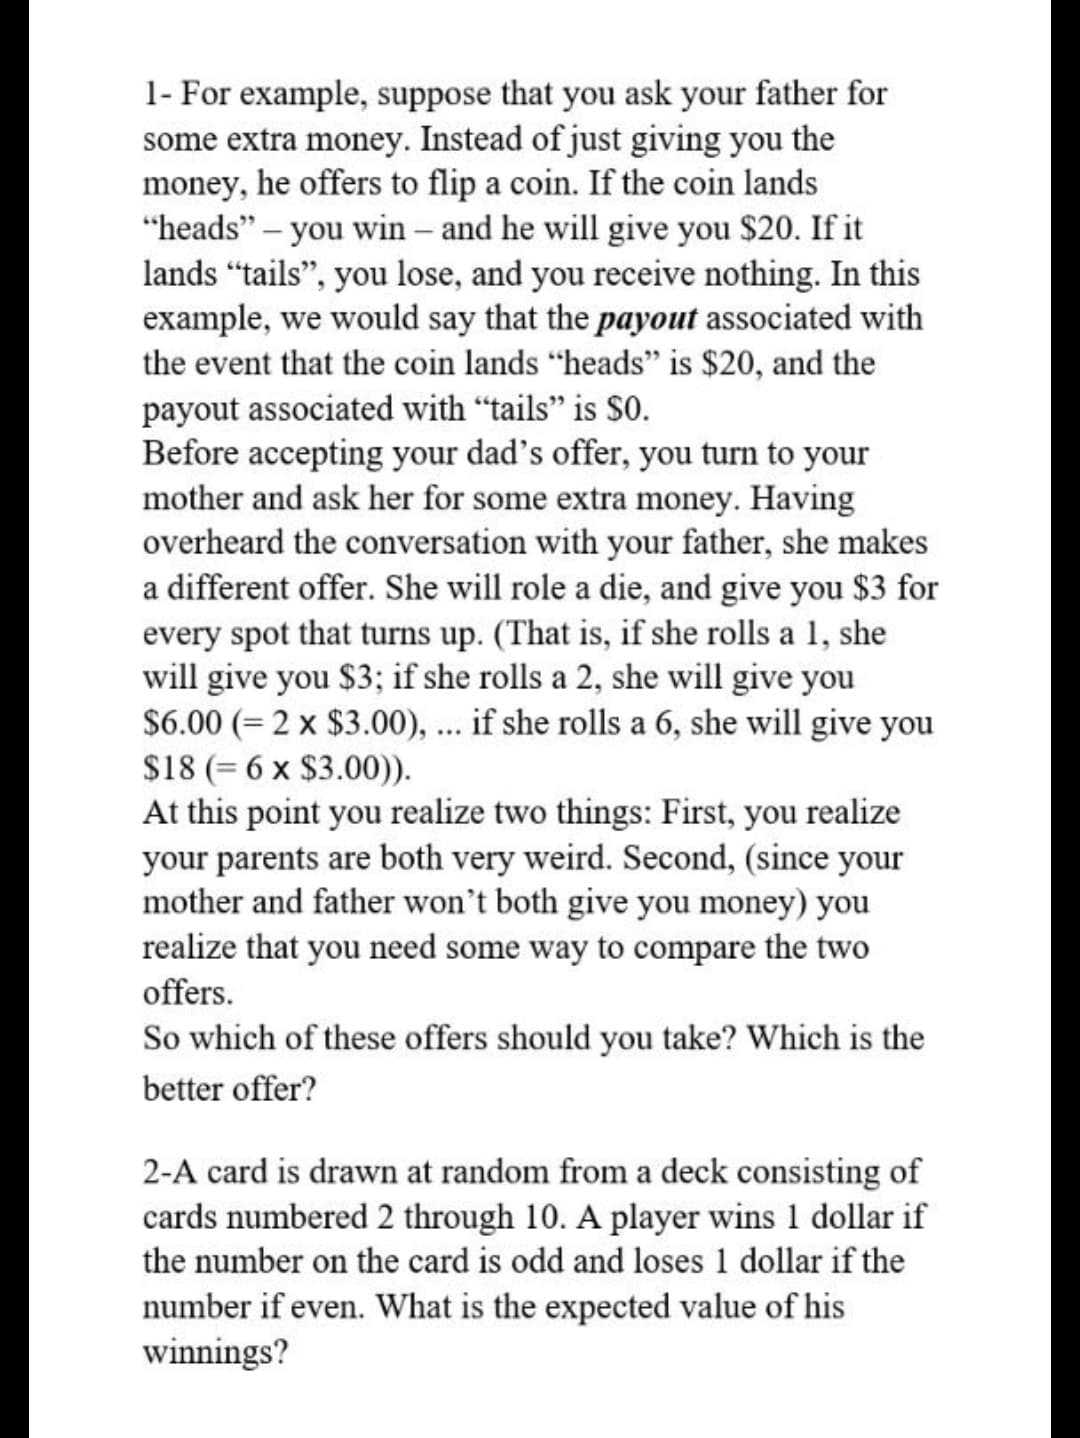 1- For example, suppose that you ask your father for
some extra money. Instead of just giving you the
money, he offers to flip a coin. If the coin lands
"heads" – you win – and he will give you $20. If it
lands “tails", you lose, and you receive nothing. In this
example, we would say that the payout associated with
the event that the coin lands "heads" is $20, and the
payout associated with "tails" is $0.
Before accepting your dad's offer, you turn to your
mother and ask her for some extra money. Having
overheard the conversation with your father, she makes
a different offer. She will role a die, and give you $3 for
every spot that turns up. (That is, if she rolls a 1, she
will give you $3; if she rolls a 2, she will give you
$6.00 (= 2 x $3.00), ... if she rolls a 6, she will give you
$18 (= 6 x $3.00)).
At this point you realize two things: First, you realize
your parents are both very weird. Second, (since your
mother and father won't both give you money) you
realize that you need some way to compare the two
offers.
So which of these offers should you take? Which is the
better offer?
2-A card is drawn at random from a deck consisting of
cards numbered 2 through 10. A player wins 1 dollar if
the number on the card is odd and loses 1 dollar if the
number if even. What is the expected value of his
winnings?
